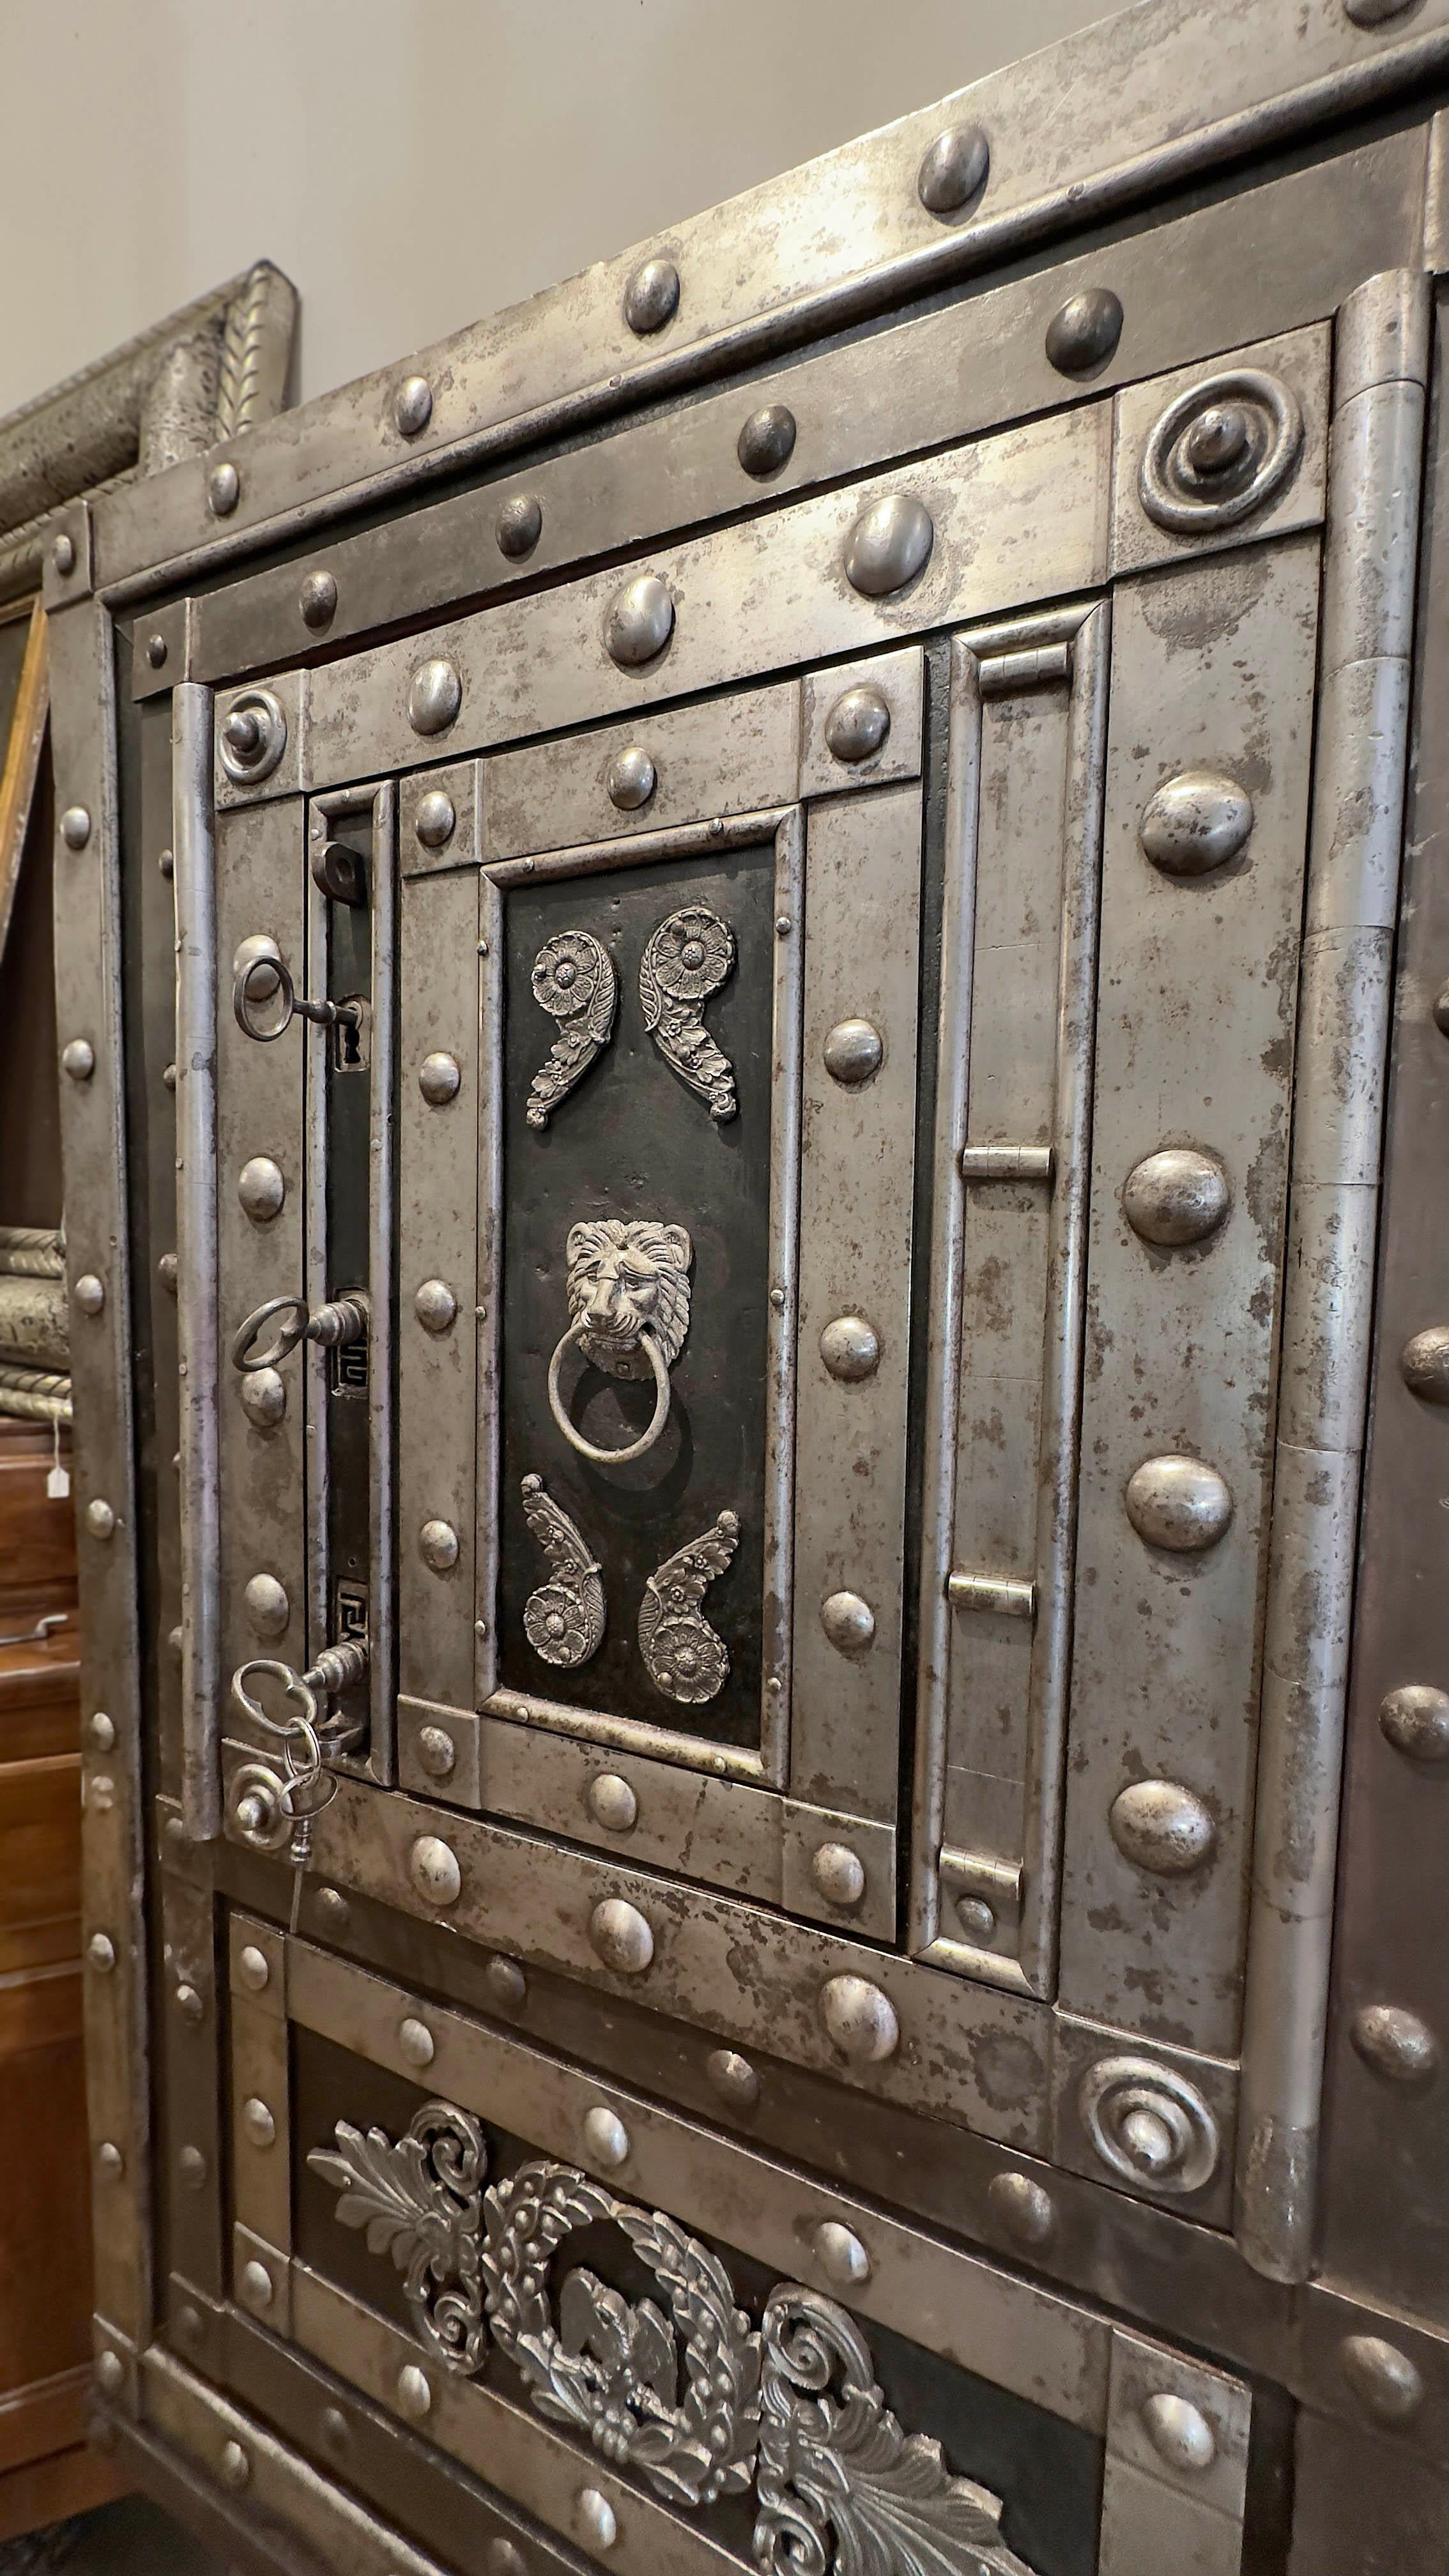 END OF 18th - EARLY 19th CENTURY IRON SAFE  For Sale 5